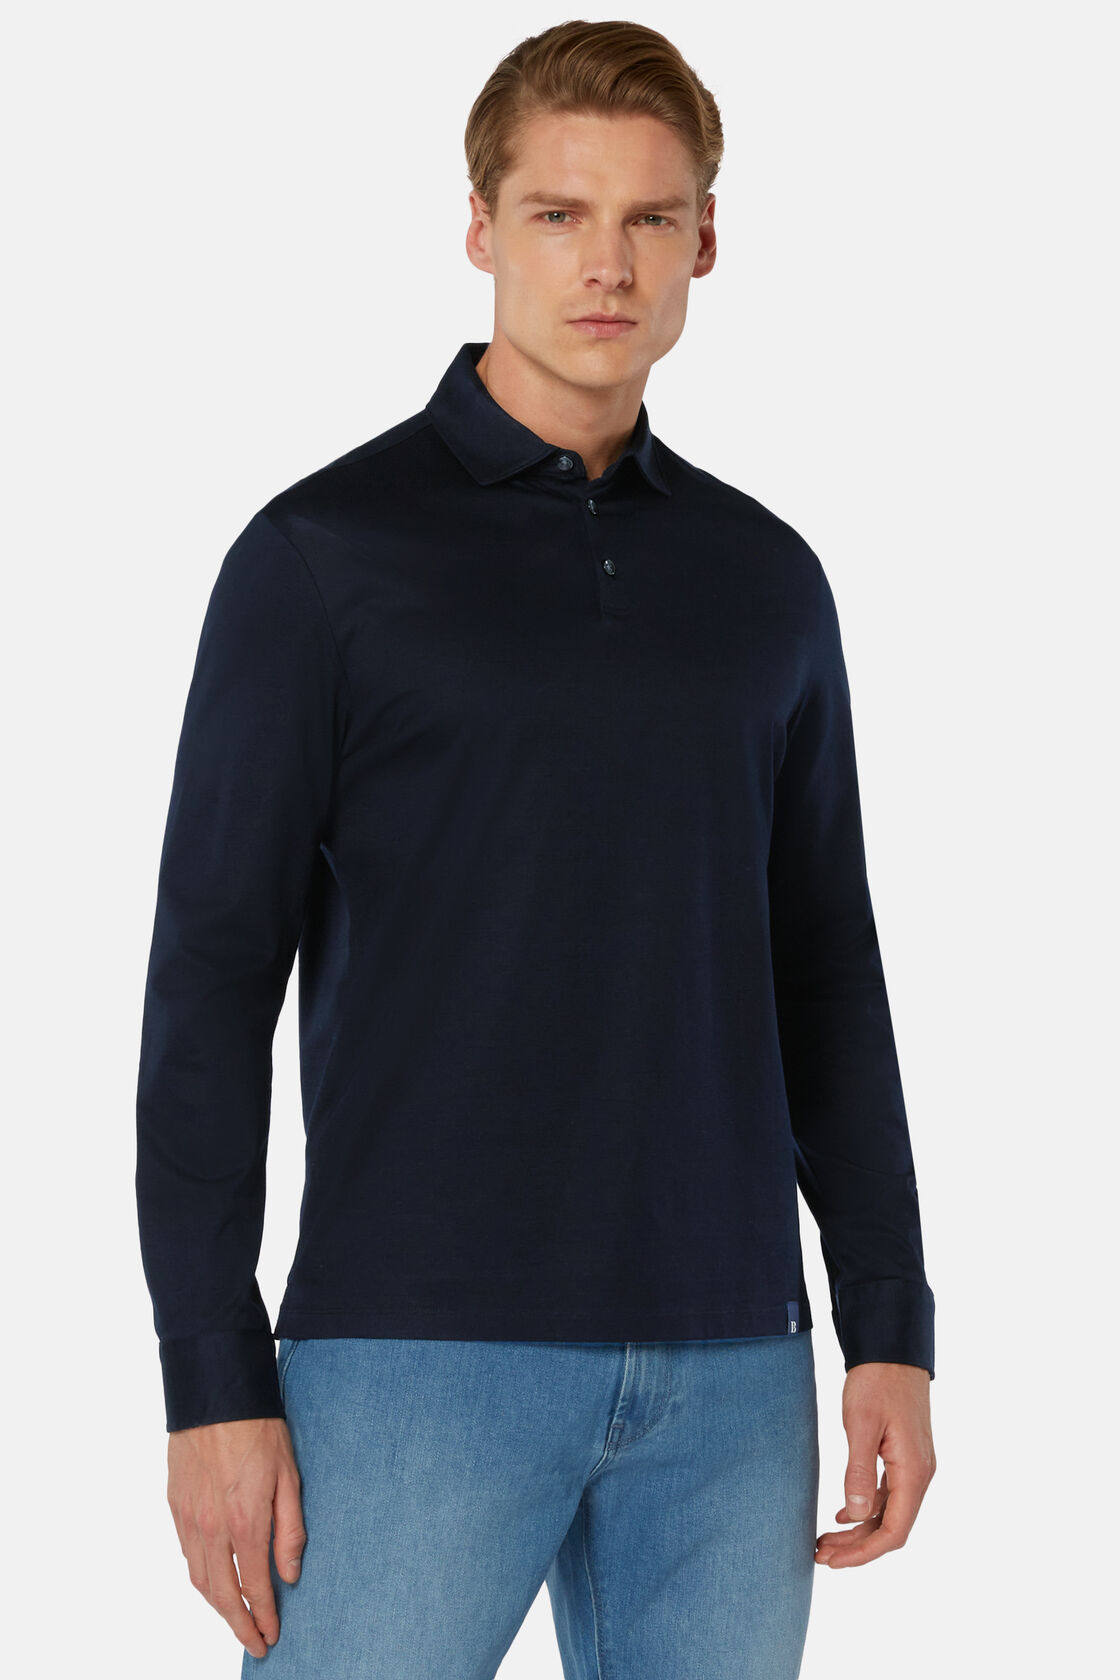 Long Sleeved Regular Fit Polo Shirt In Pima Cotton Jersey, Navy blue, hi-res